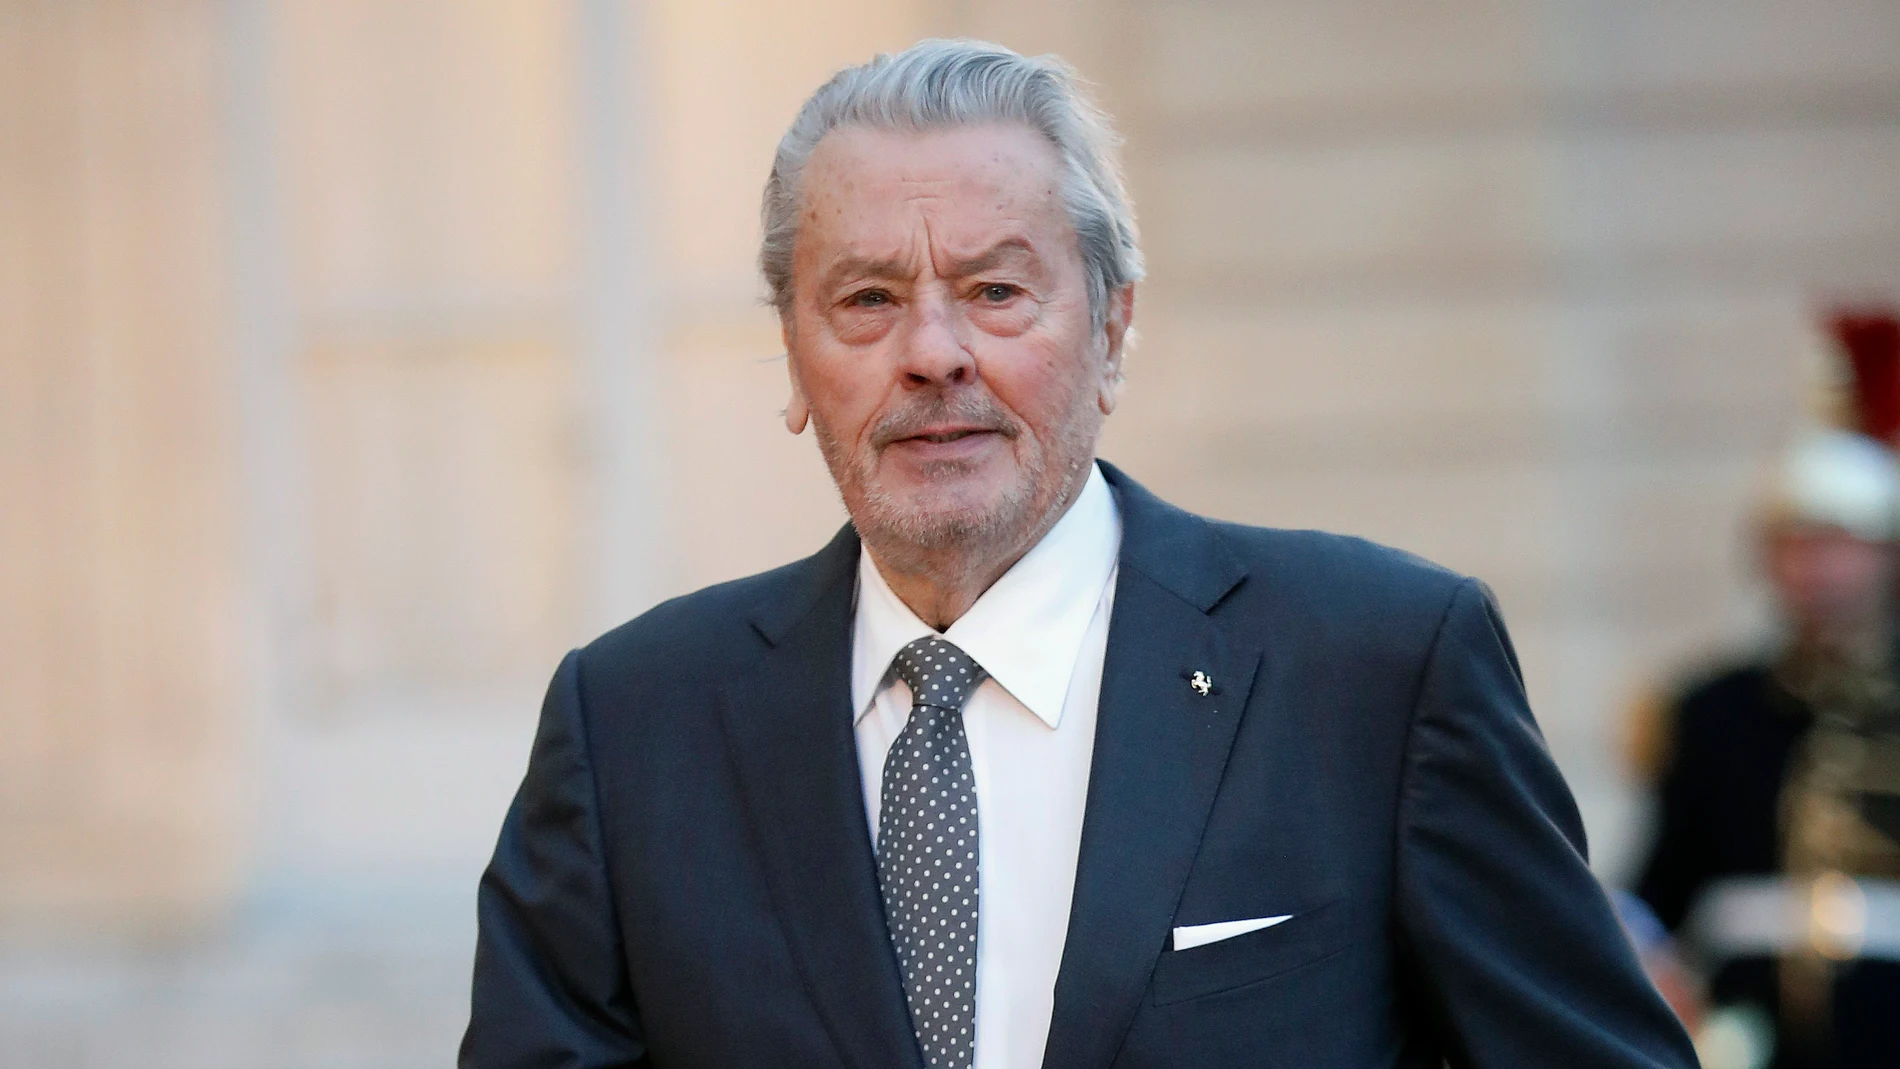 French actor Alain Delon arrives to attend a state dinner at the Elysee Palace, in Paris, Monday, March 25, 2019. Chinese President Xi Jinping is on a 3-day state visit in France where he is expected to sign a series of bilateral and economic deals on energy, the food industry, transport and other sectors. 